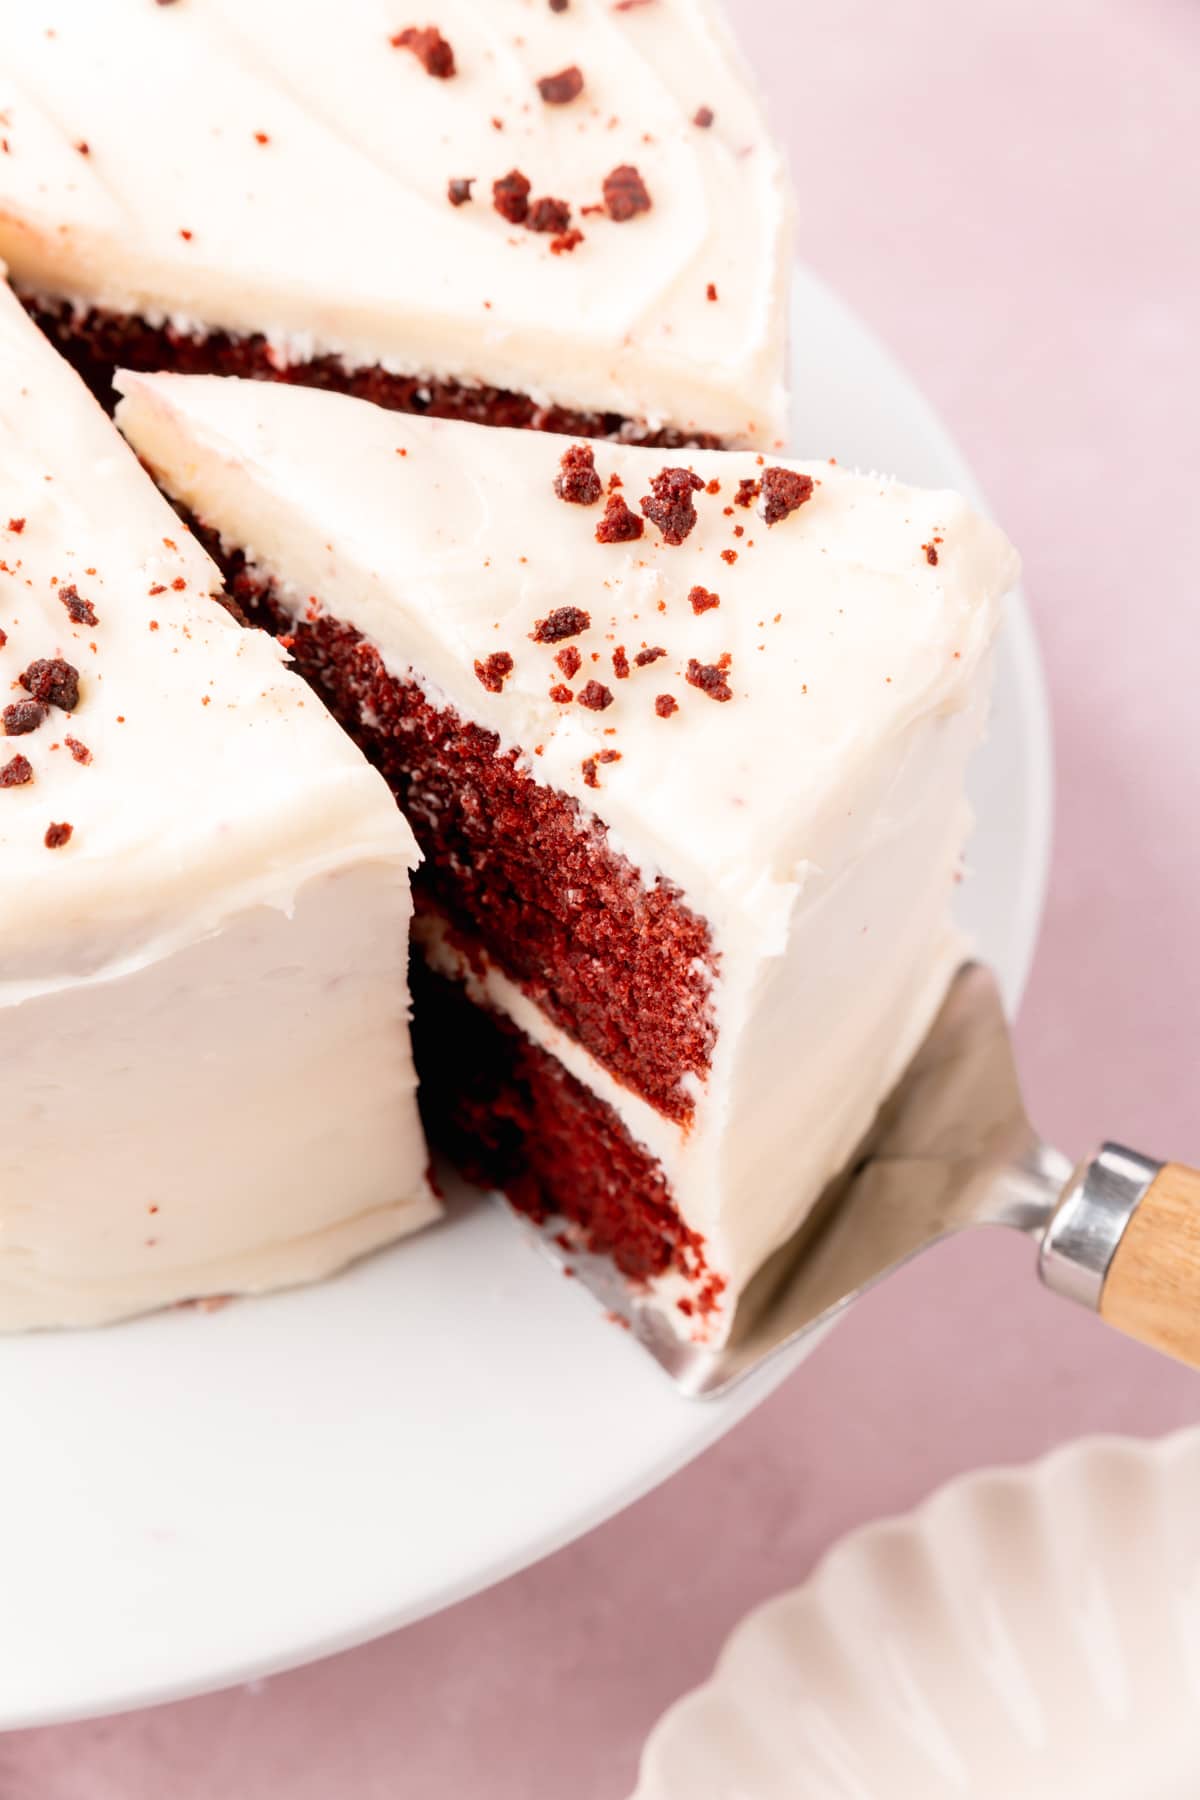 A slice of red velvet cake being pulled from the rest of the cake with a cake server.